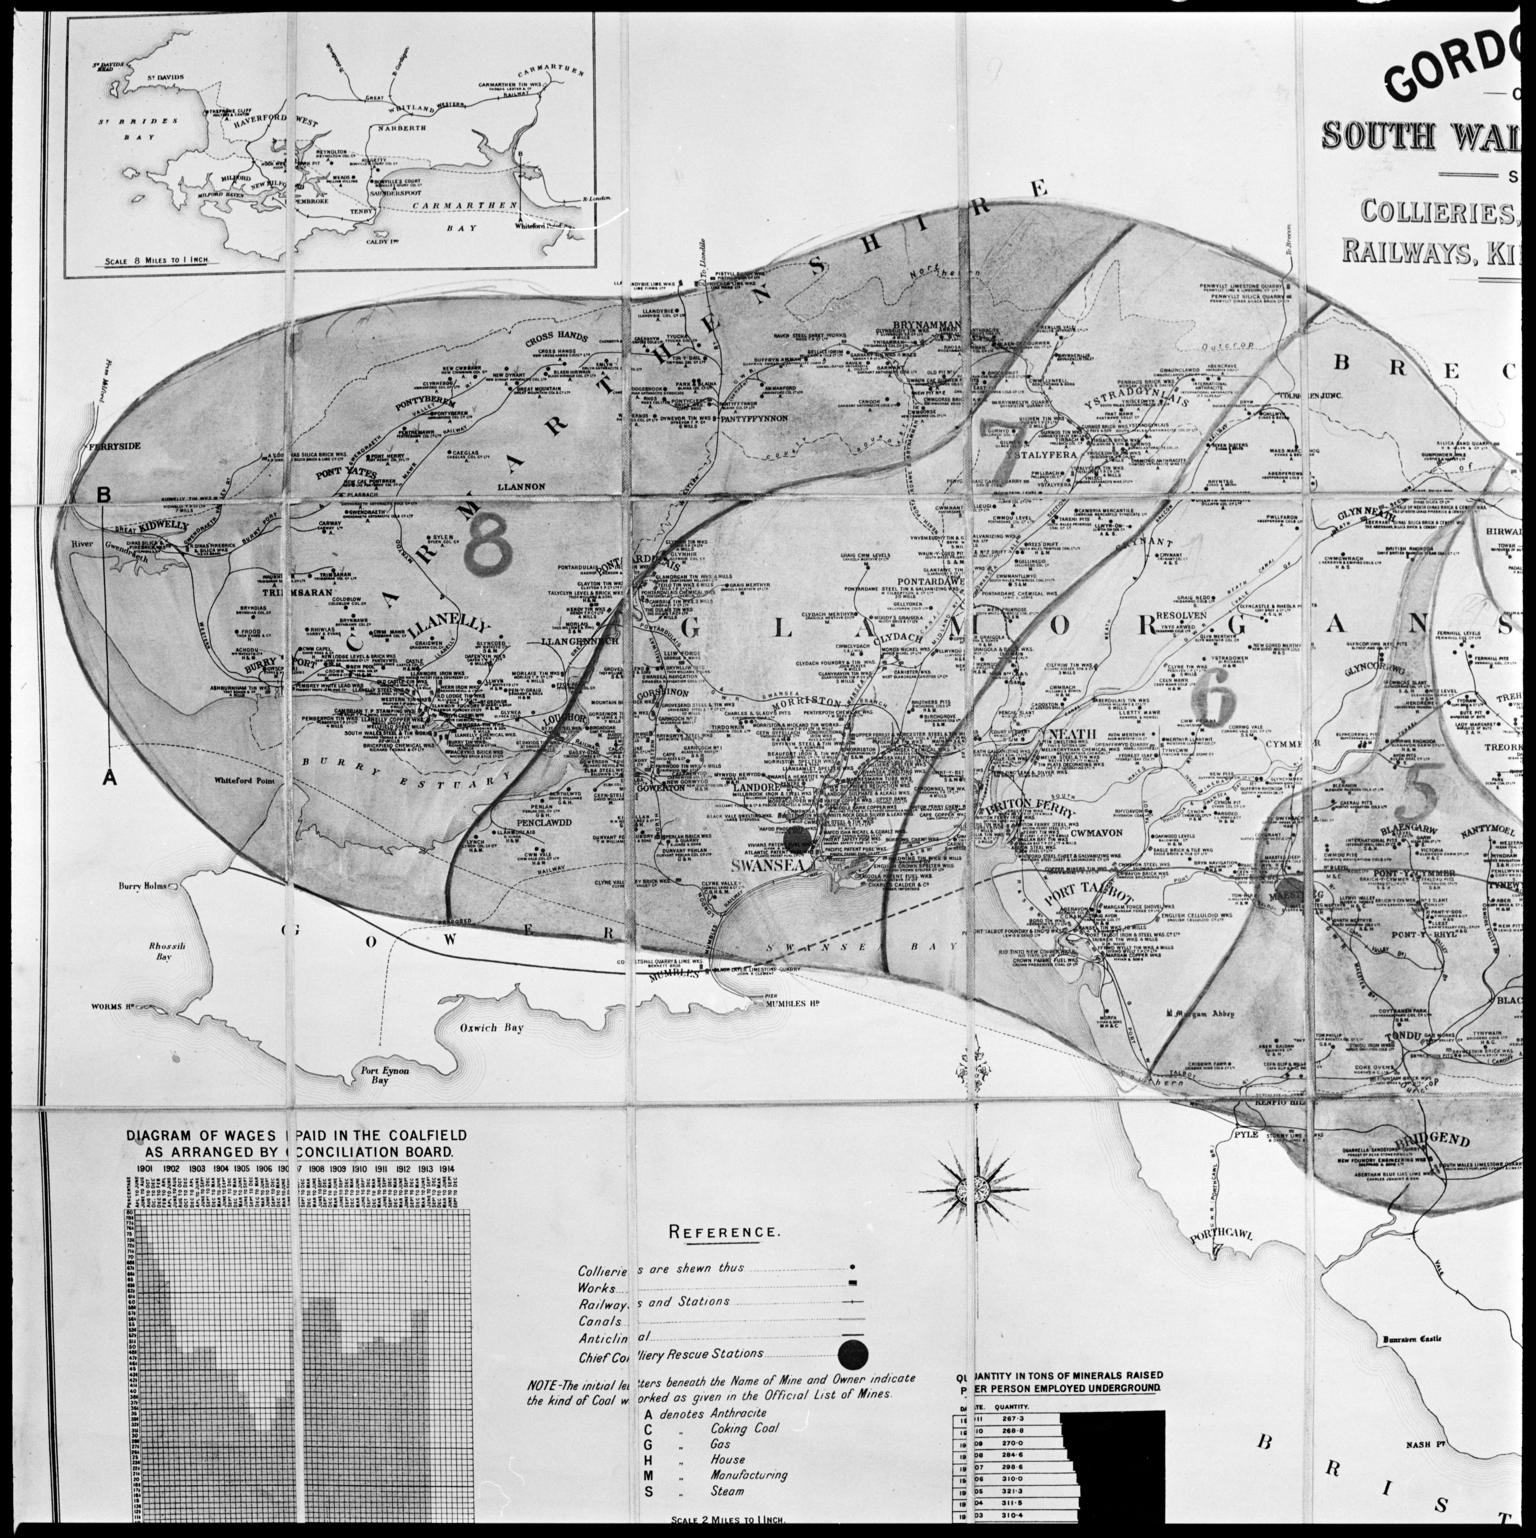 Map of the South Wales coalfield, negative